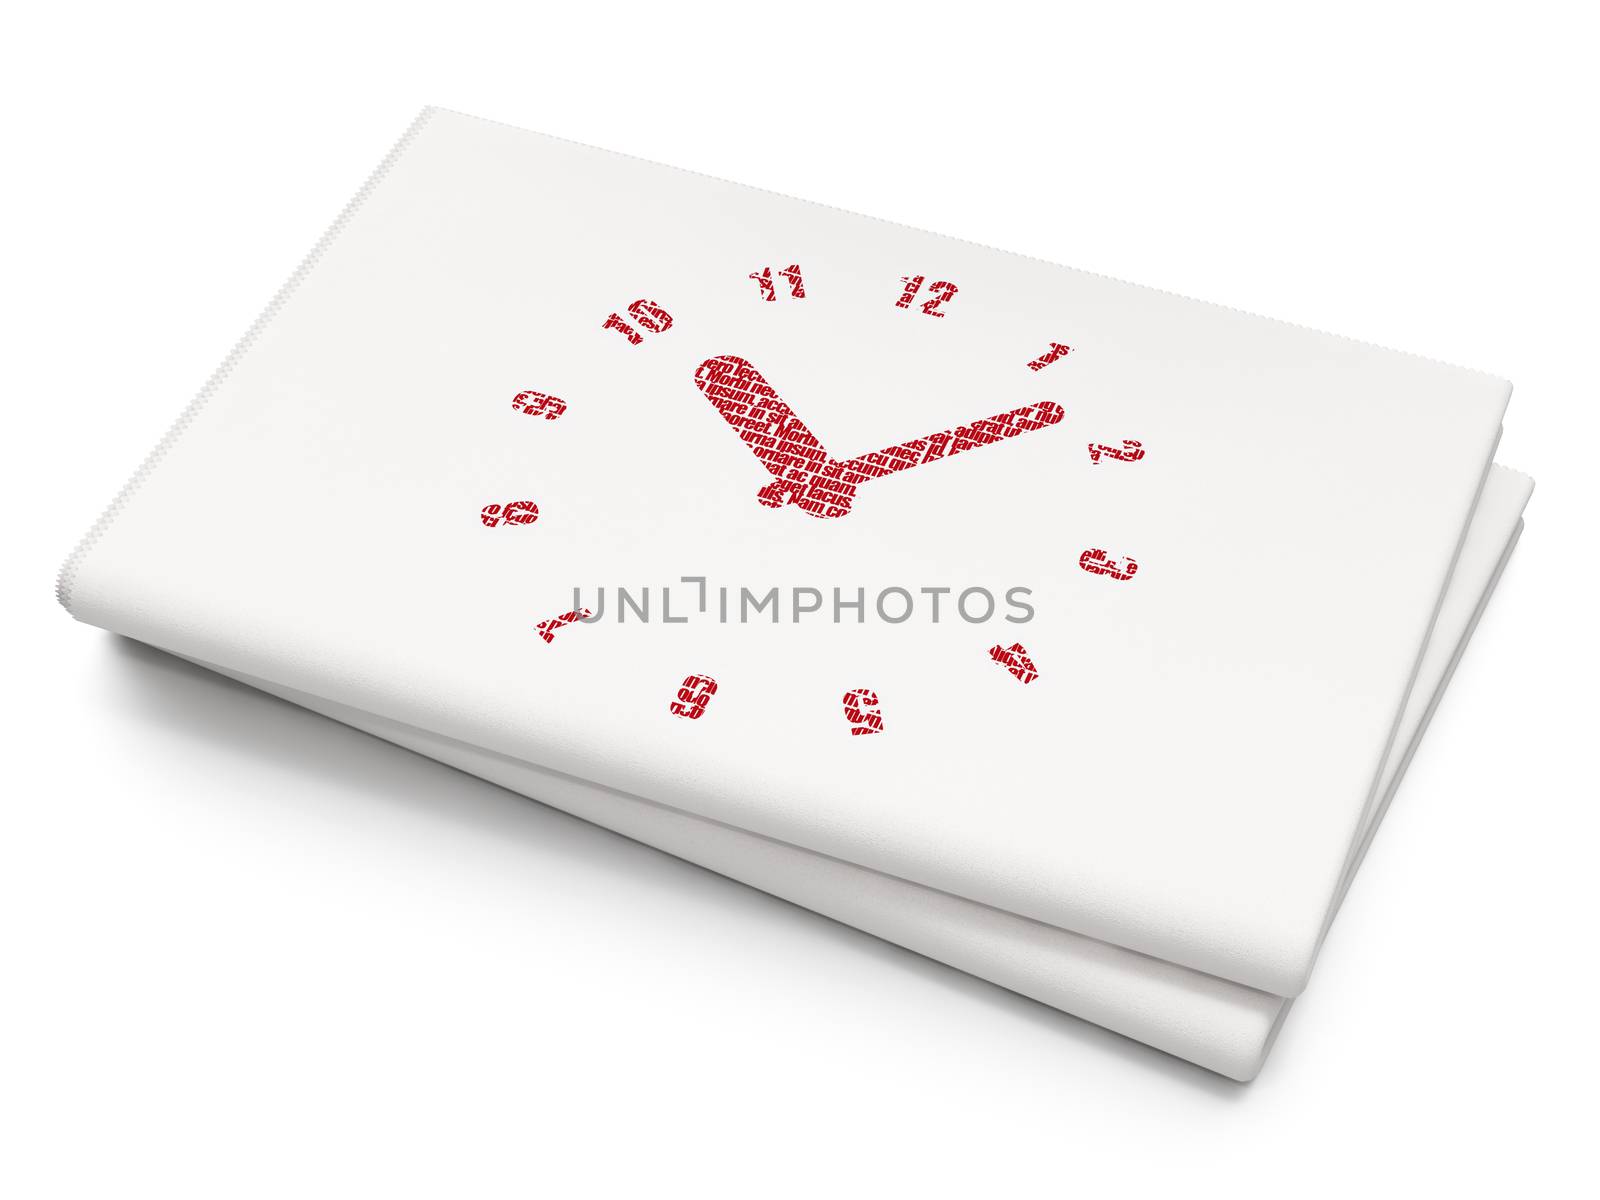 Timeline concept: Pixelated red Clock icon on Blank Newspaper background, 3D rendering